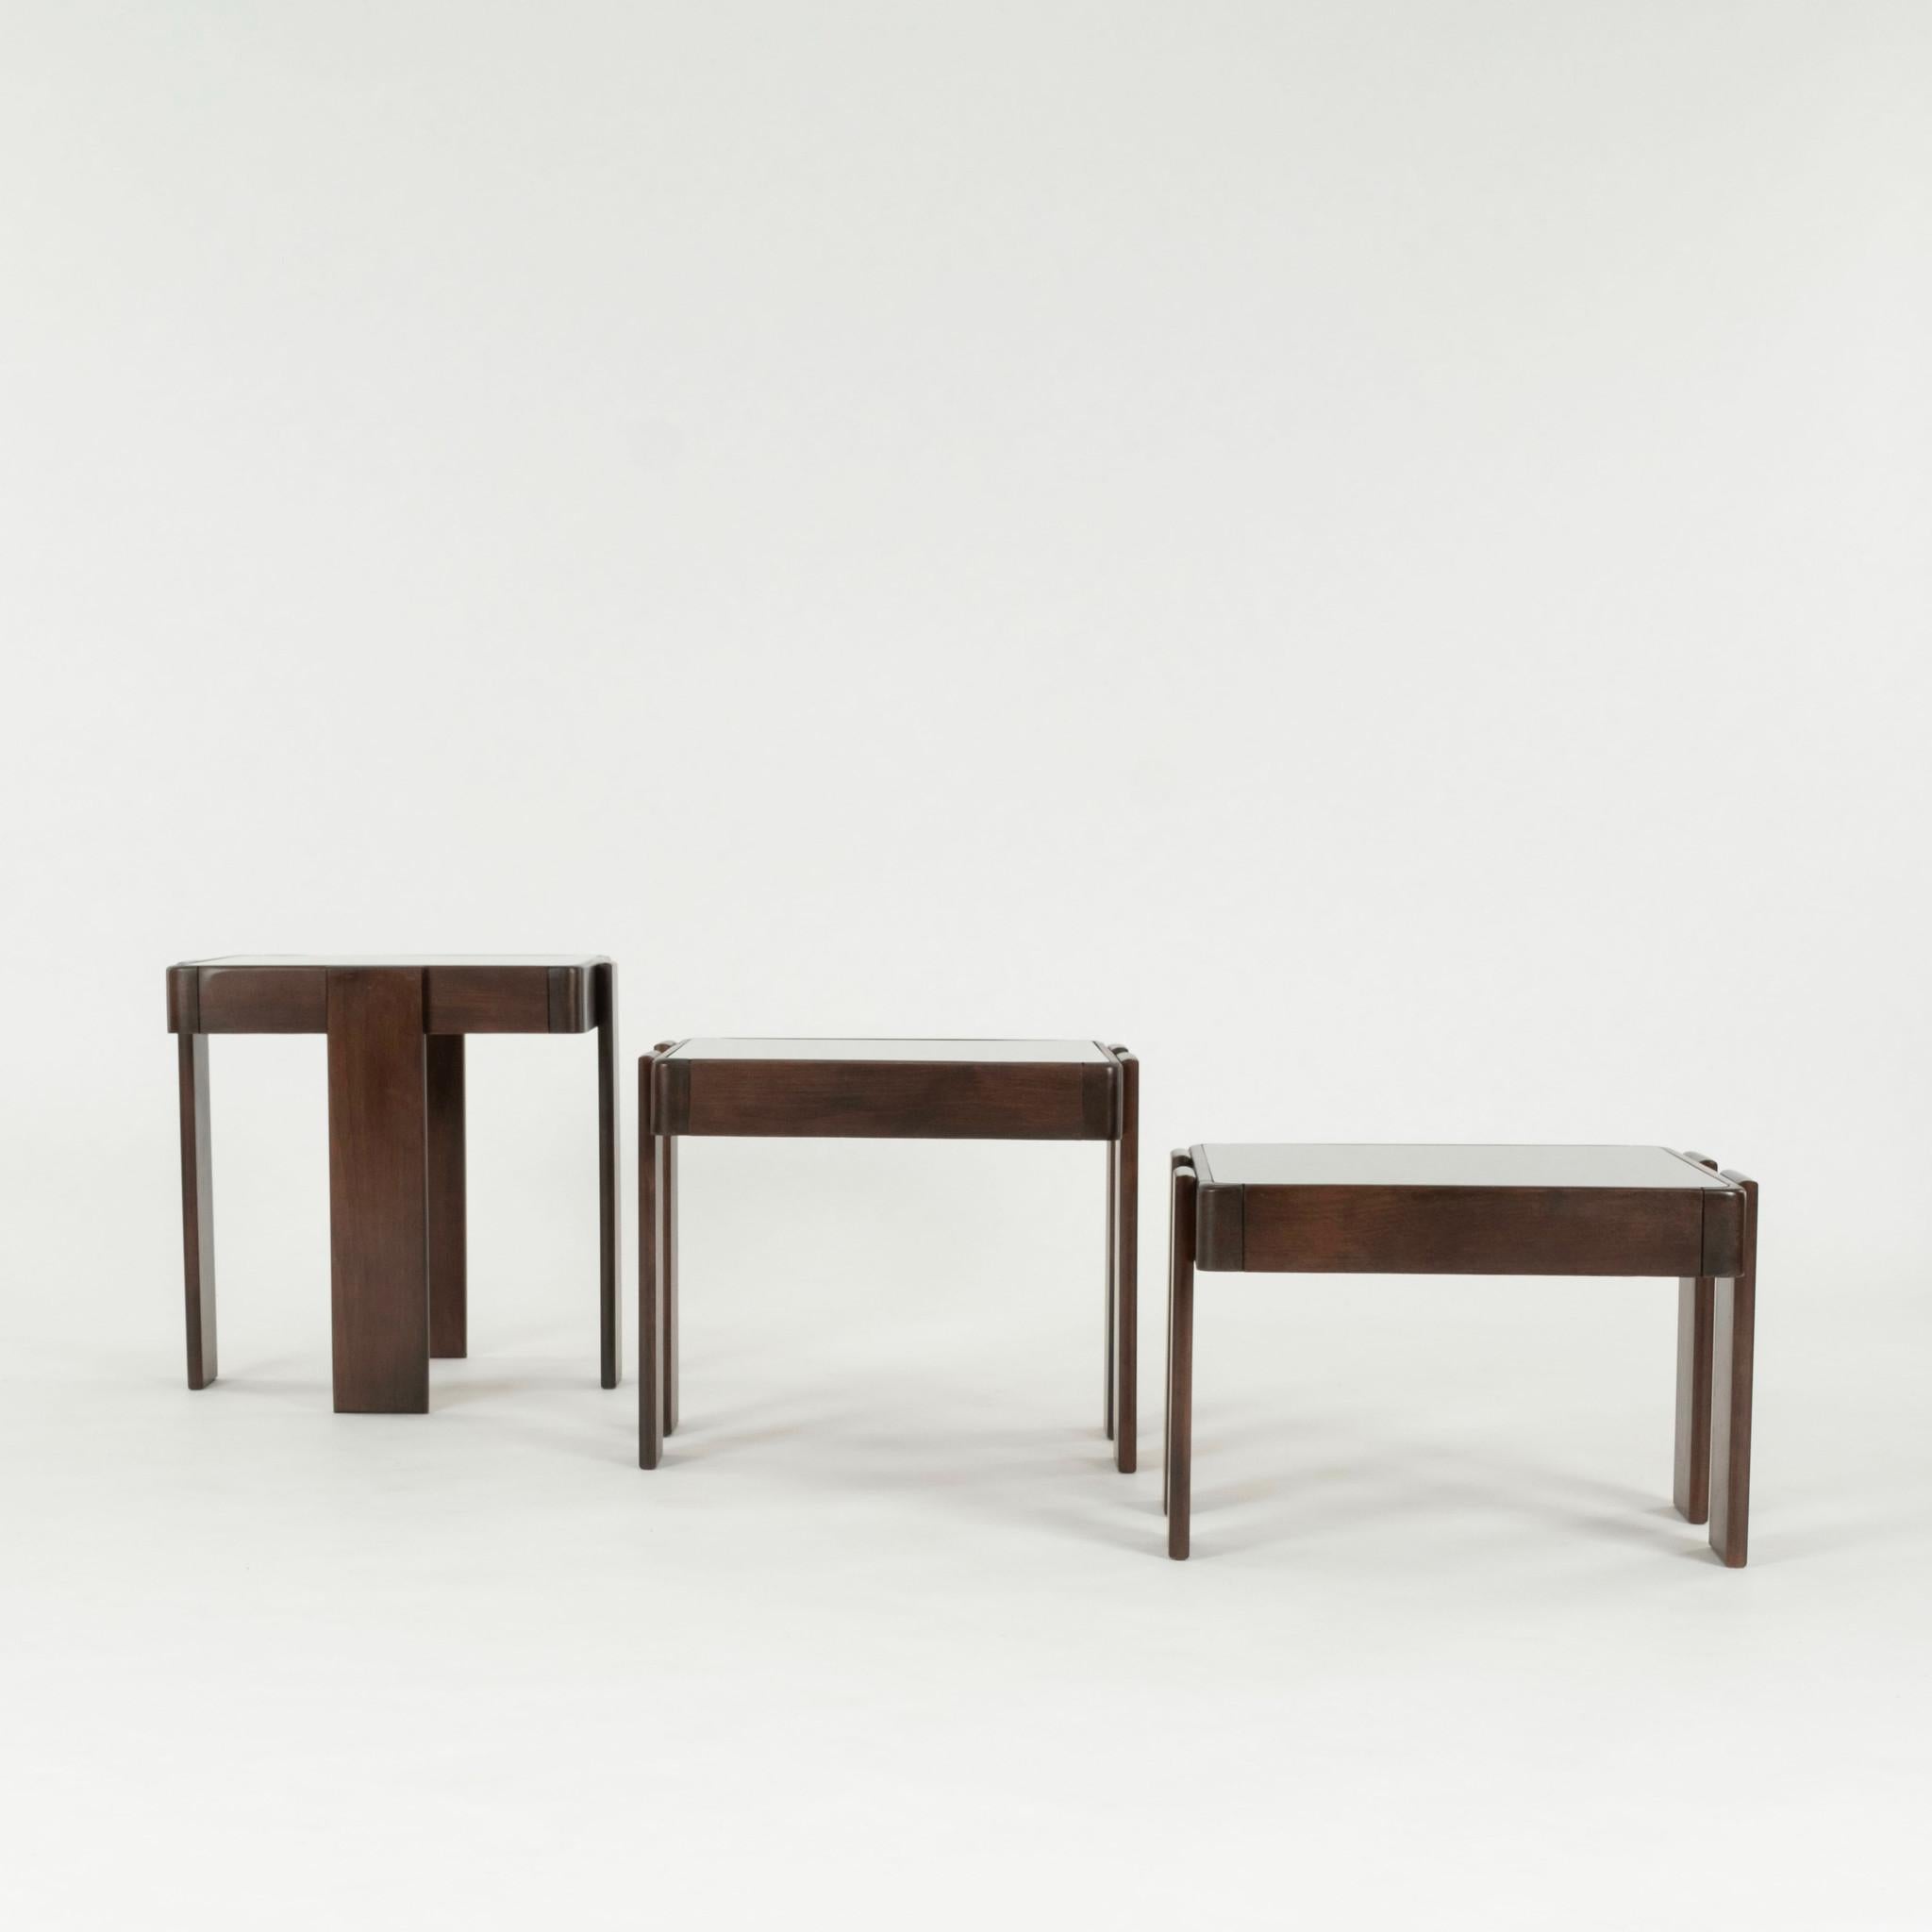 Set of three walnut wood and bronze smoked glass nesting tables by Gianfranco Frattini for Cassina.

Gianfranco Frattini (May 15, 1926 – April 6, 2004) was an Italian architect and designer. He is a member of the generation that created the Italian